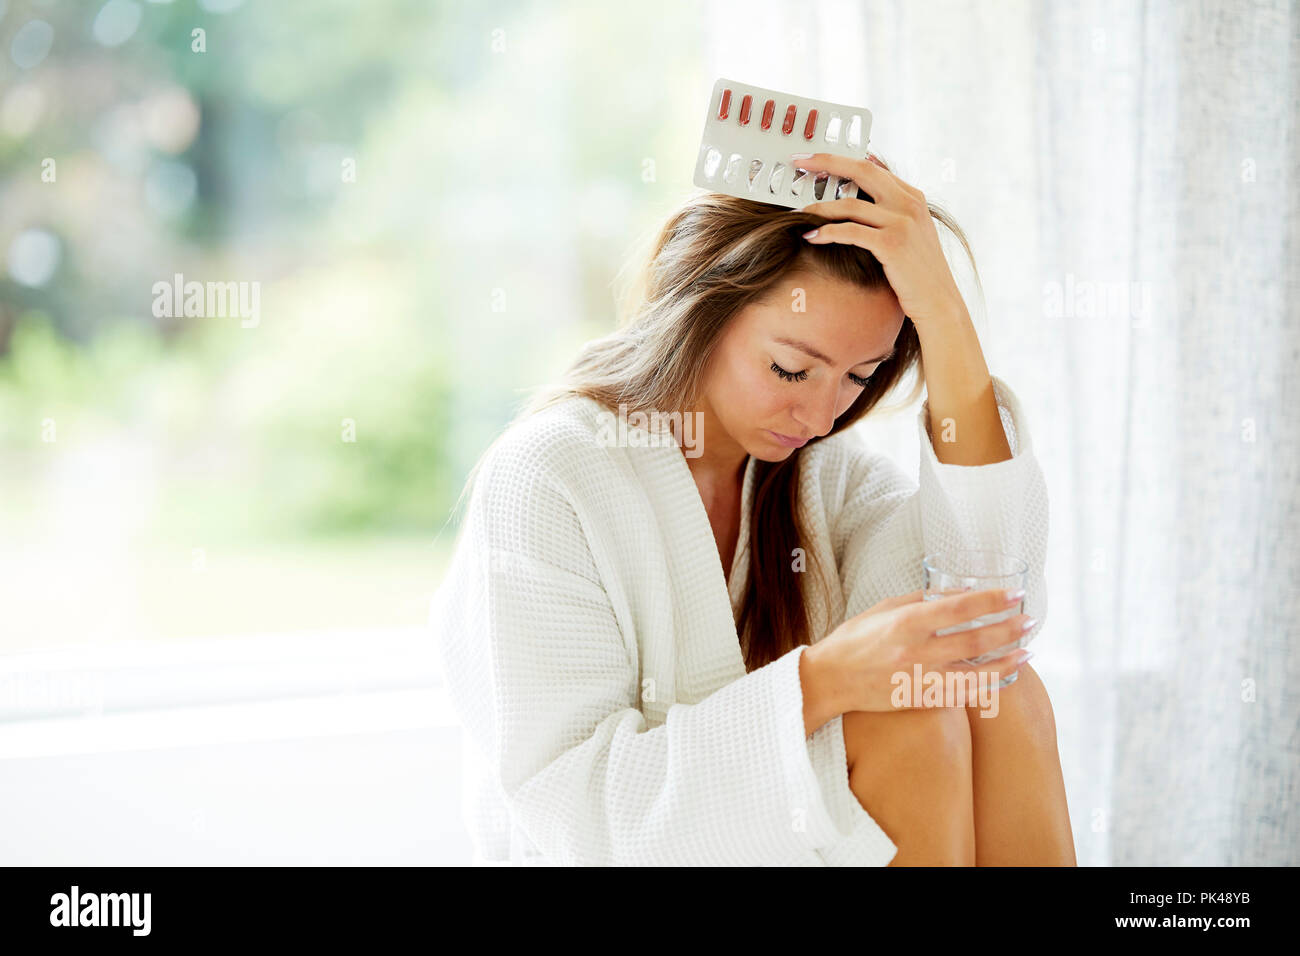 Woman holding packet of tablets Stock Photo